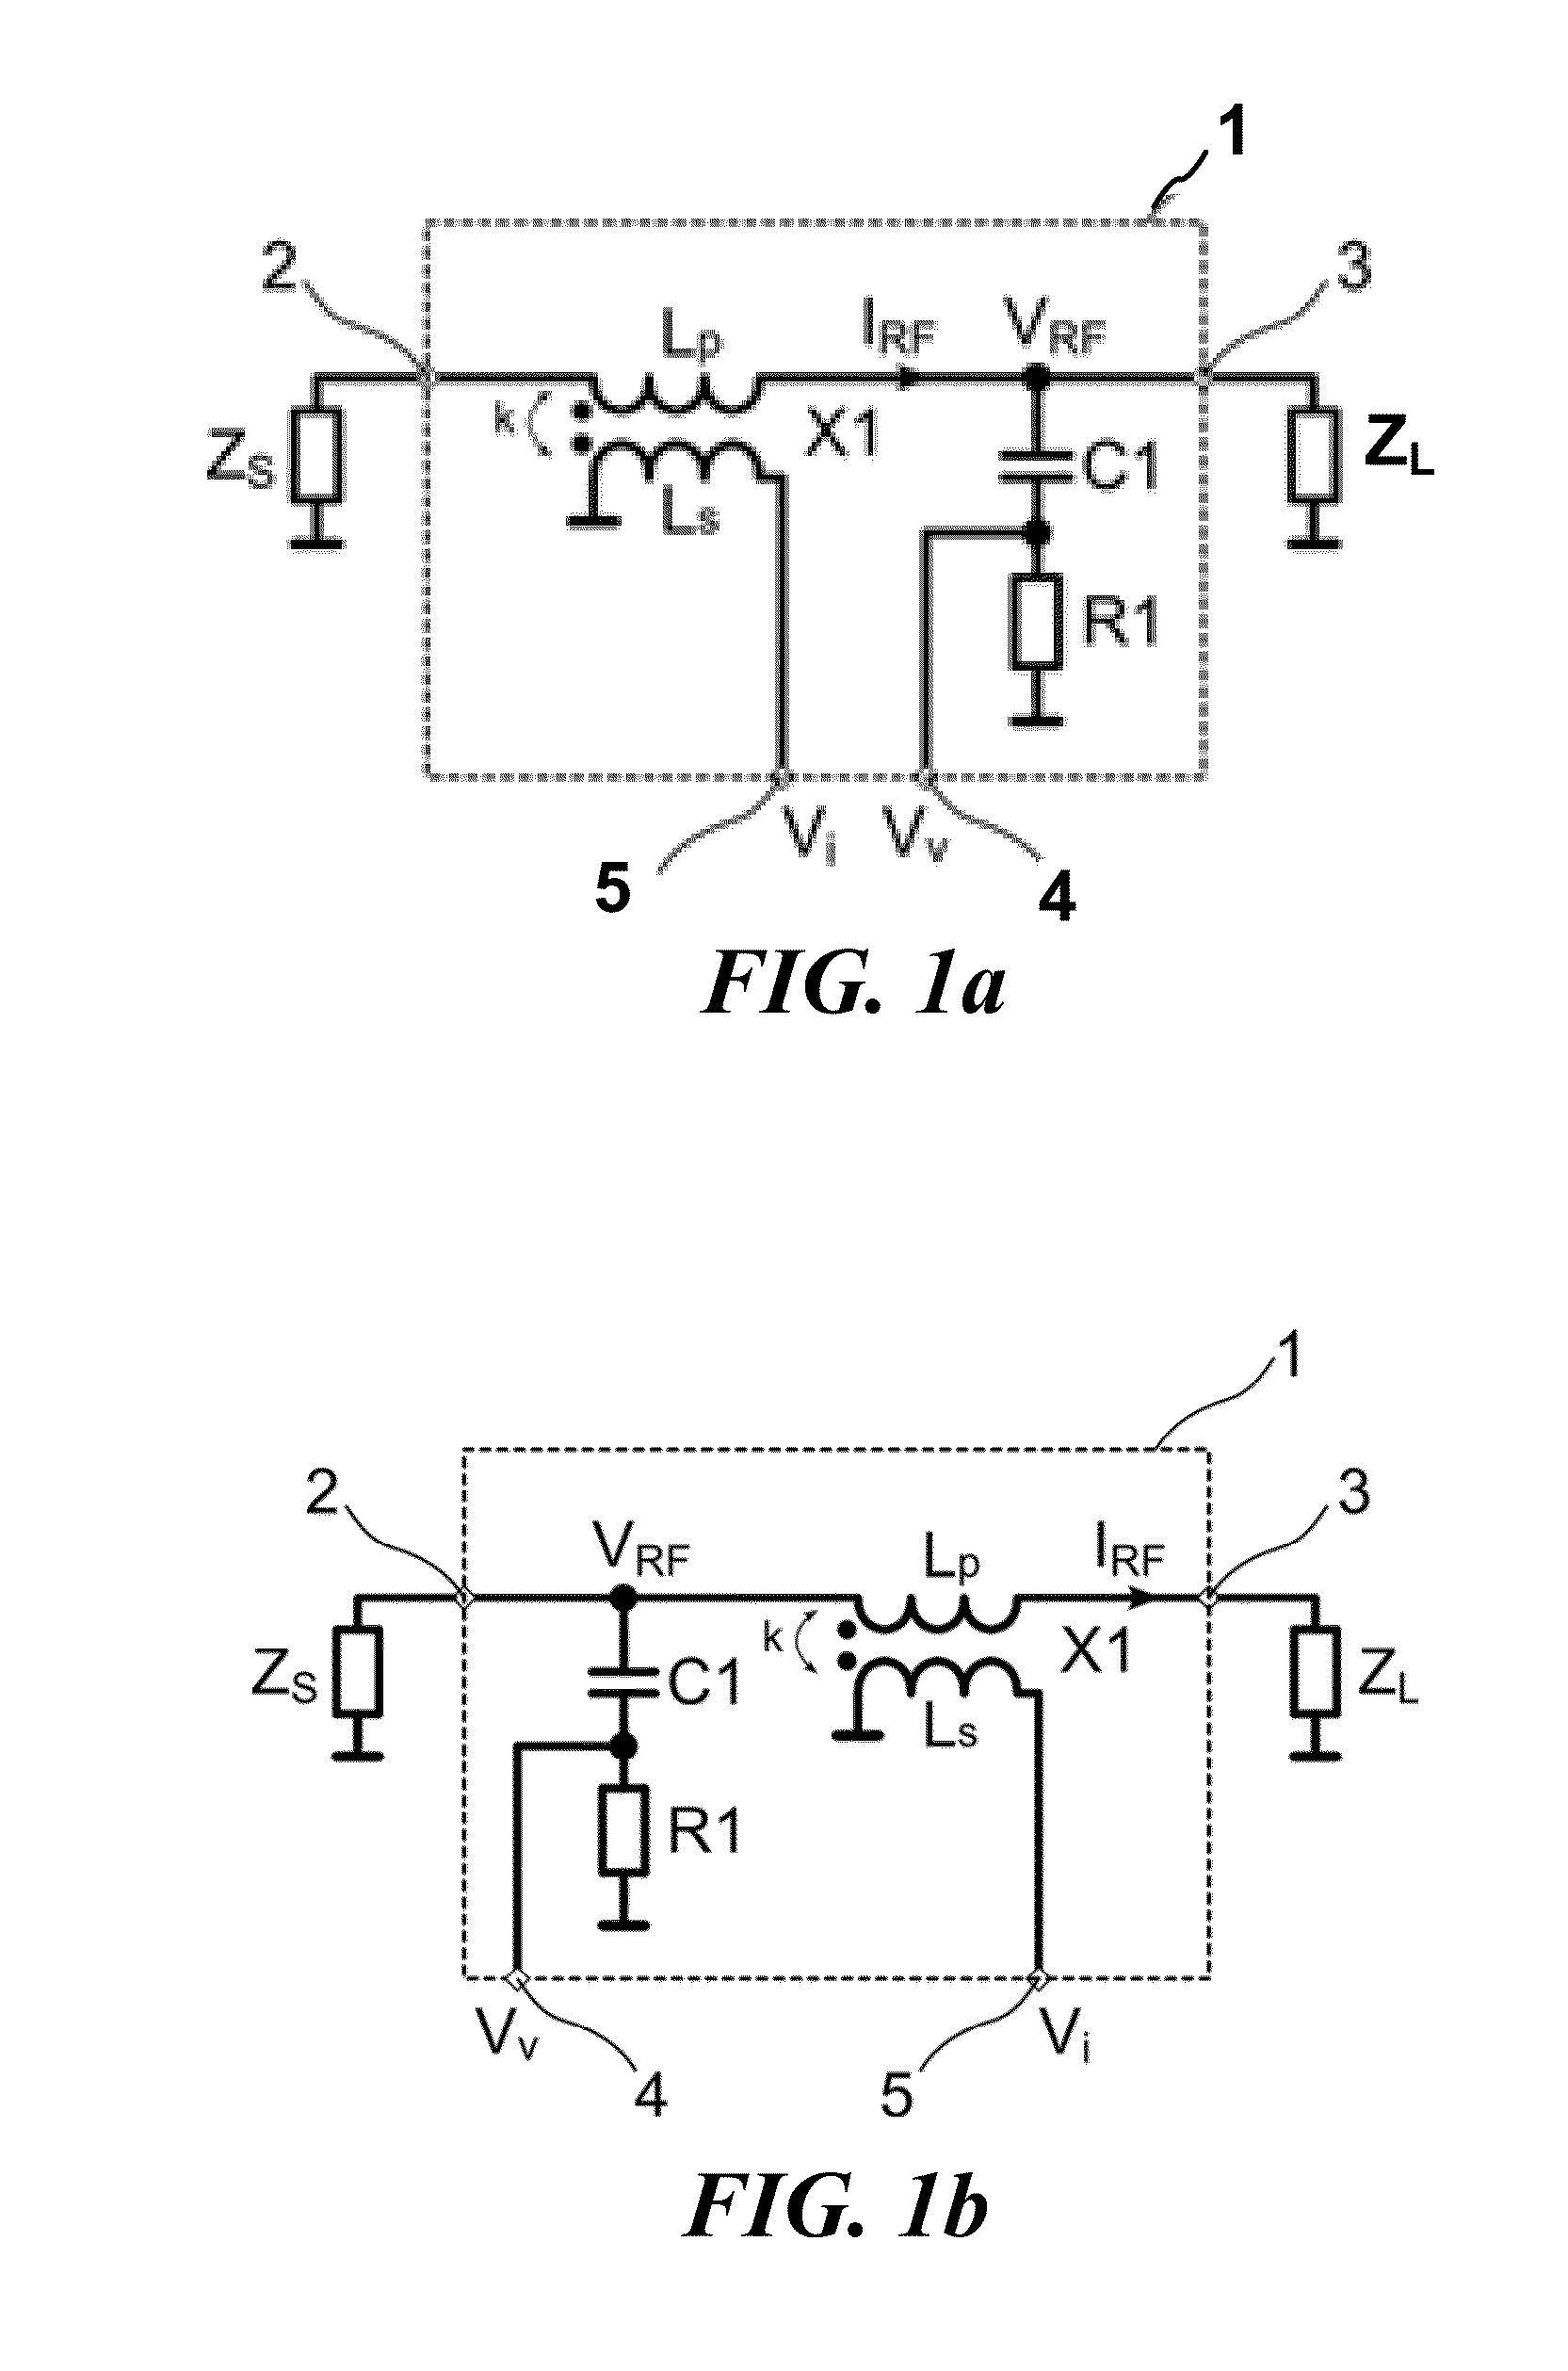 System and Method for a Transformer and a Phase-Shift Network